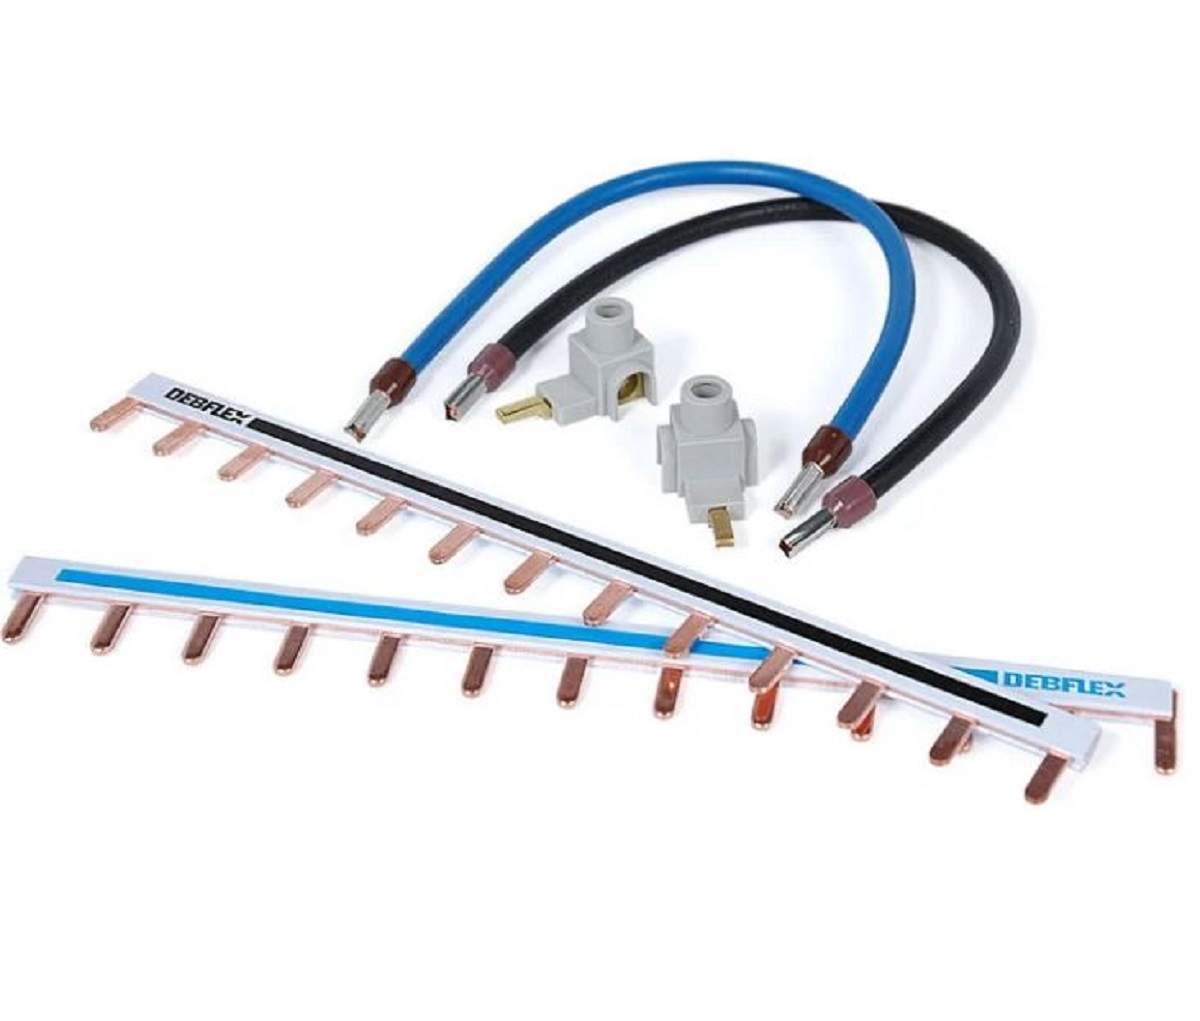 Wiring kit for electrical box, 1 row